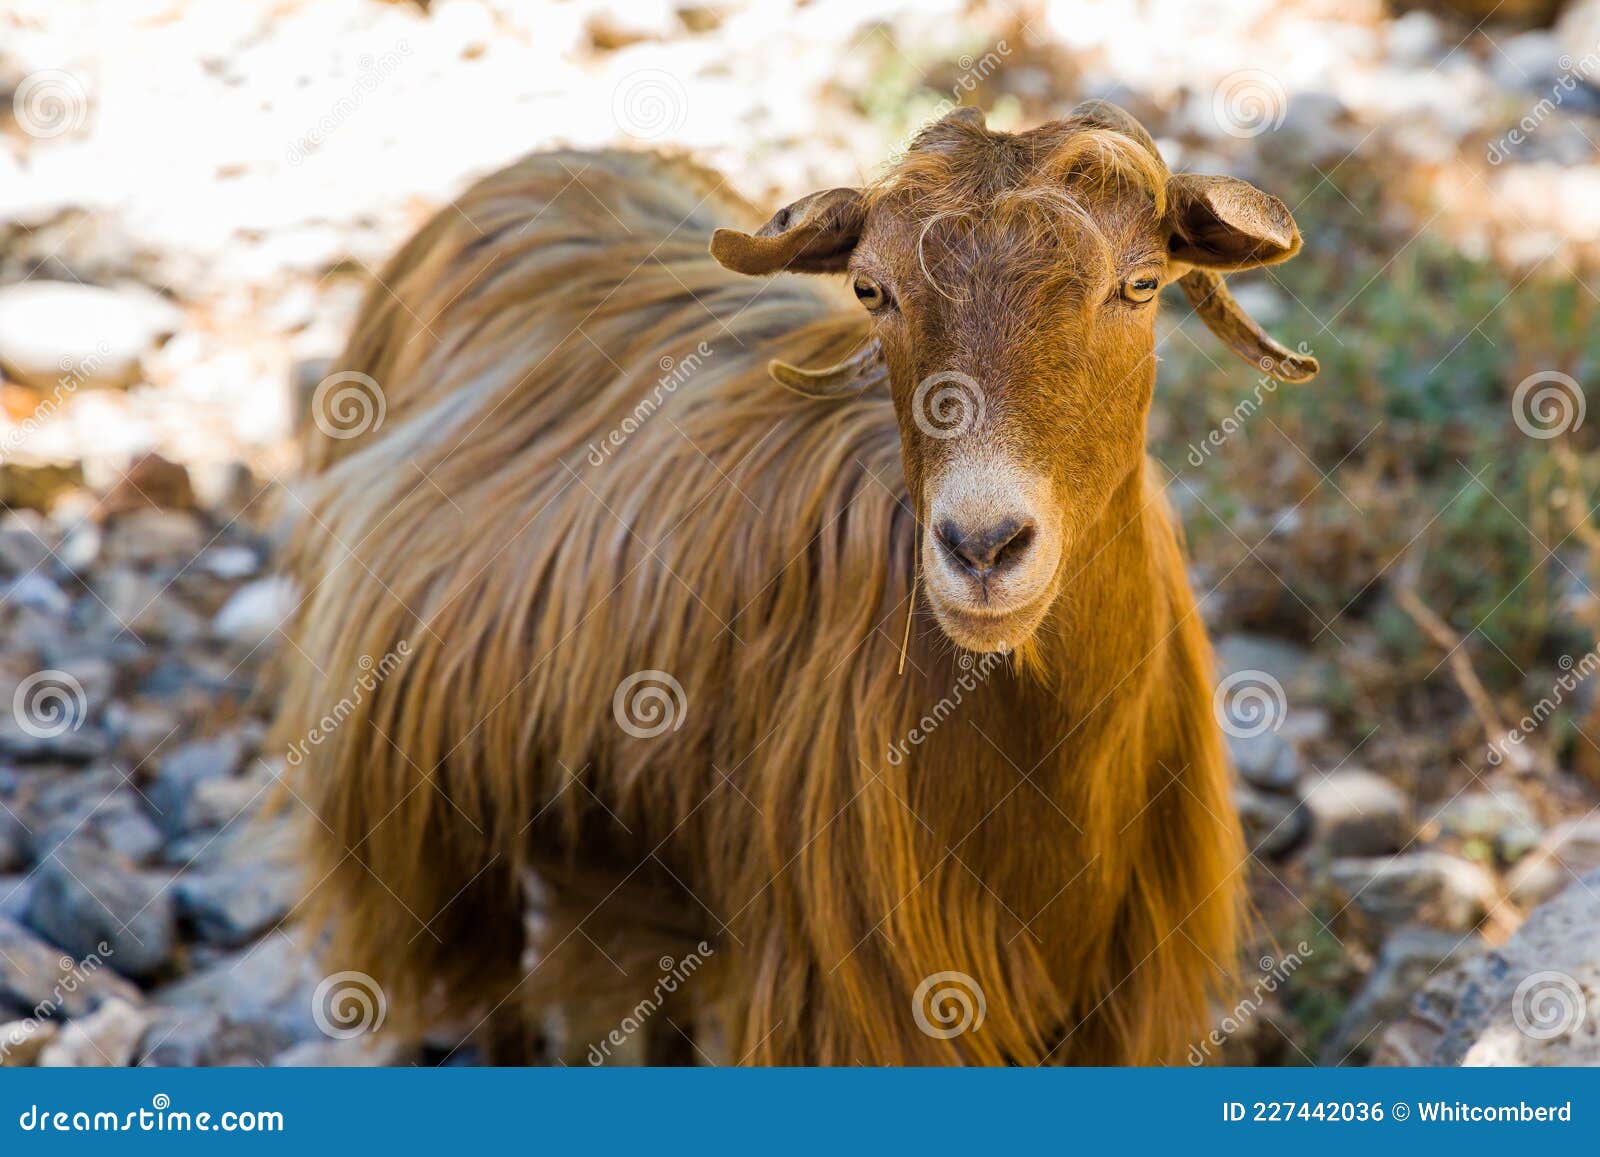 friendly goats in the imbros gorge in western crete, greece